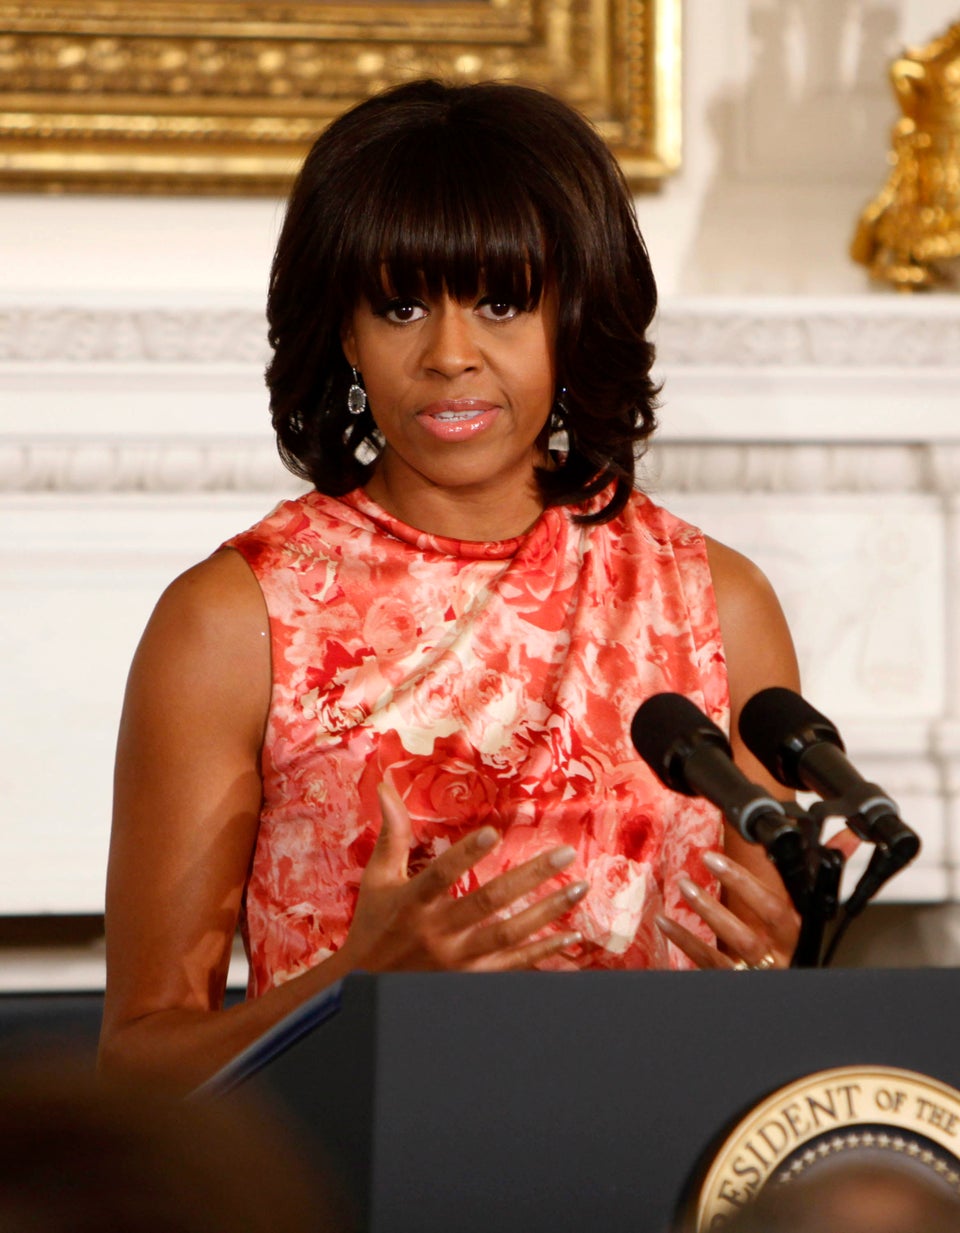 Michelle Obama to Discuss Youth Violence in Chicago